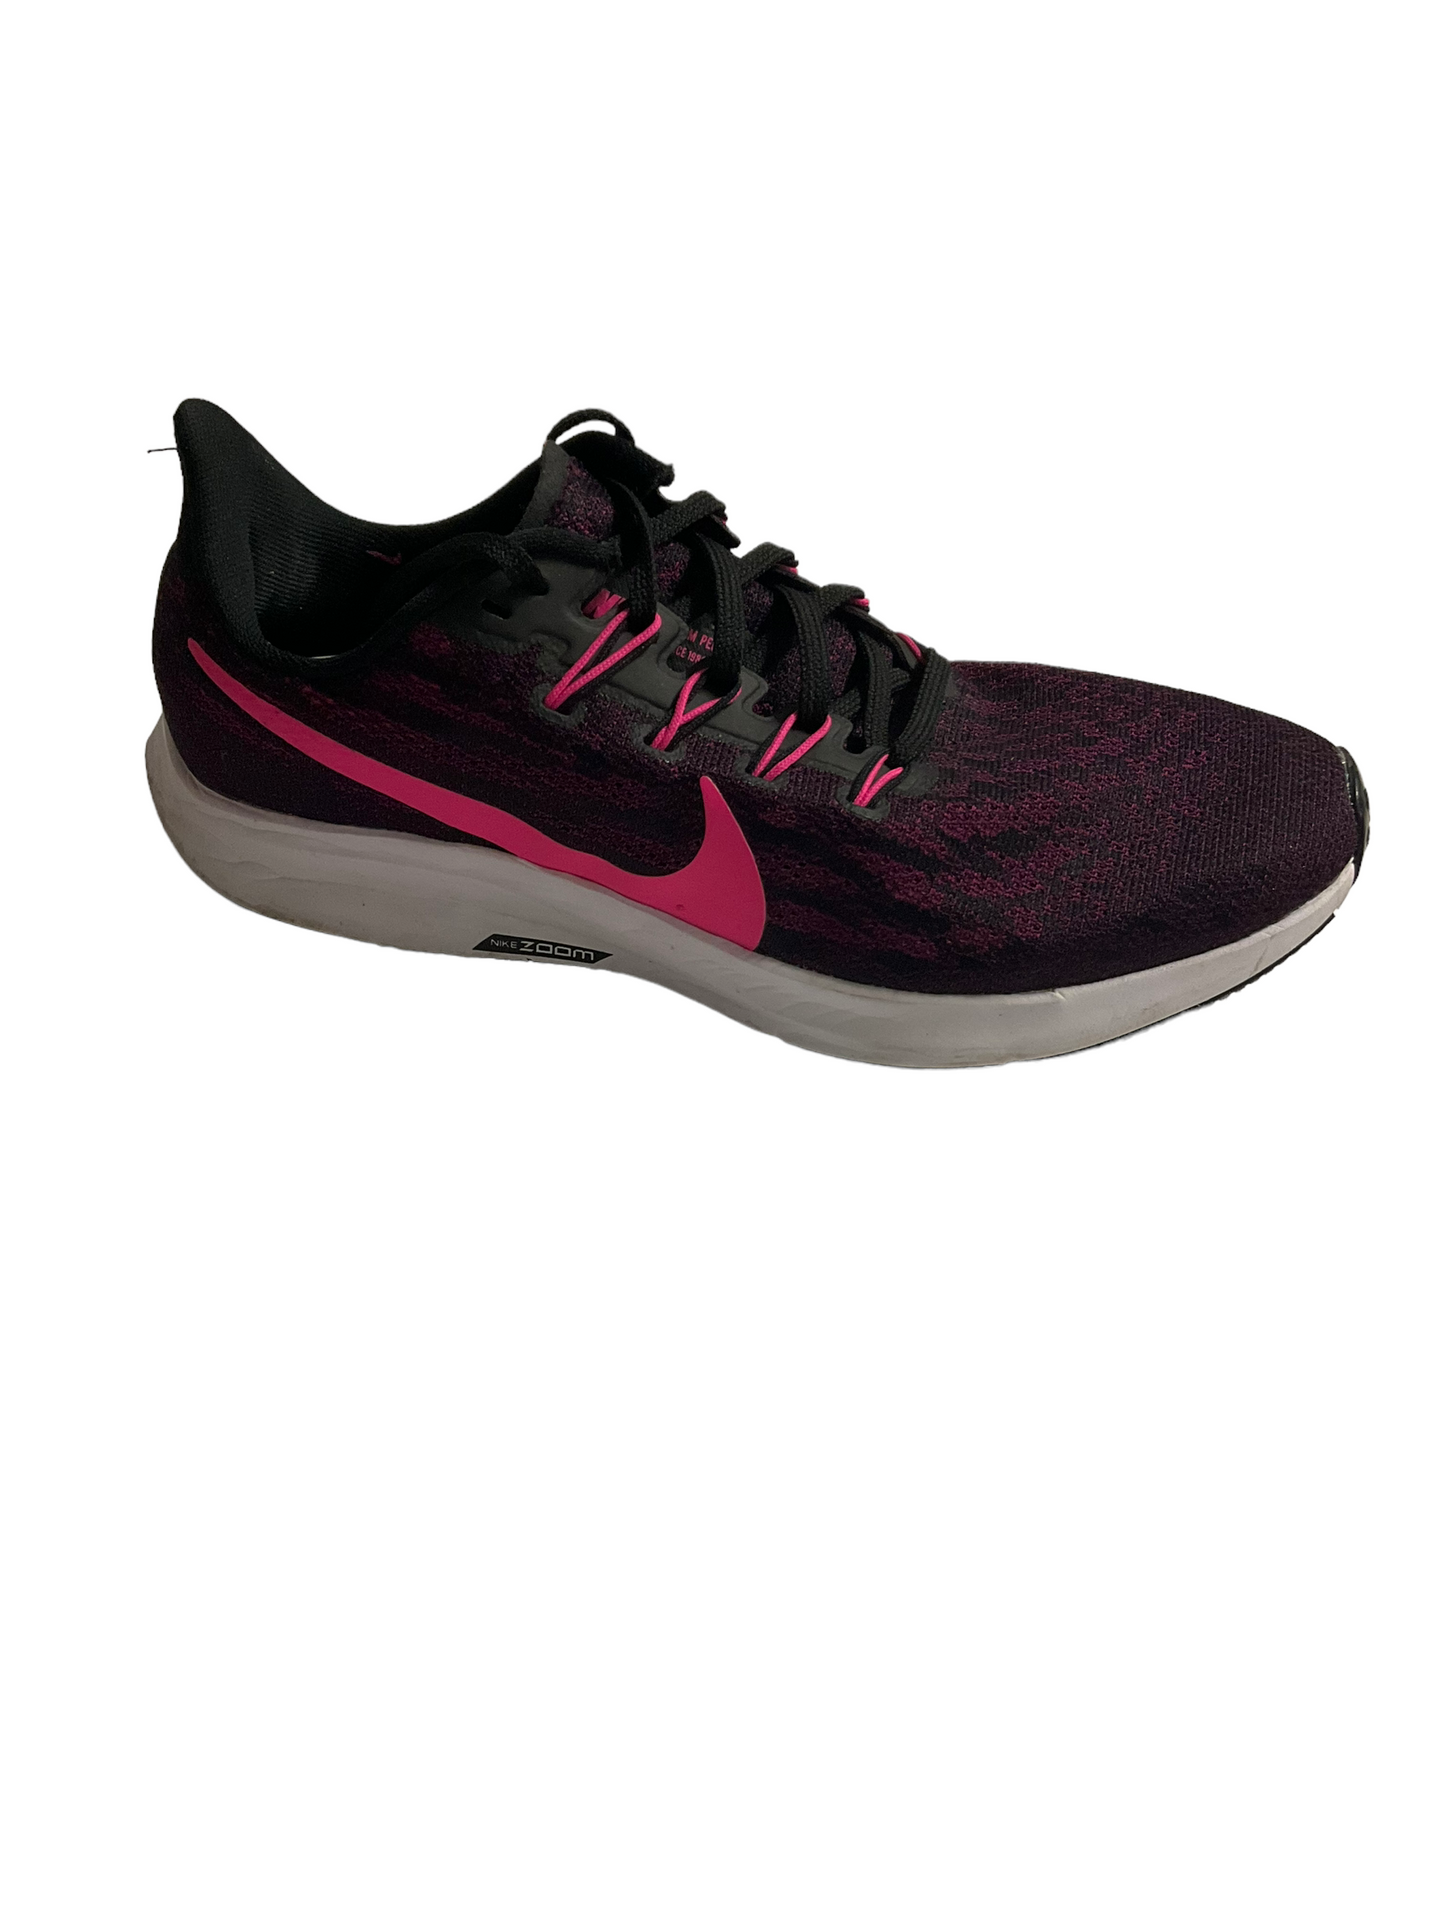 Shoes Athletic By Nike Size: 8.5 – Clothes Mentor Windsor CT #124